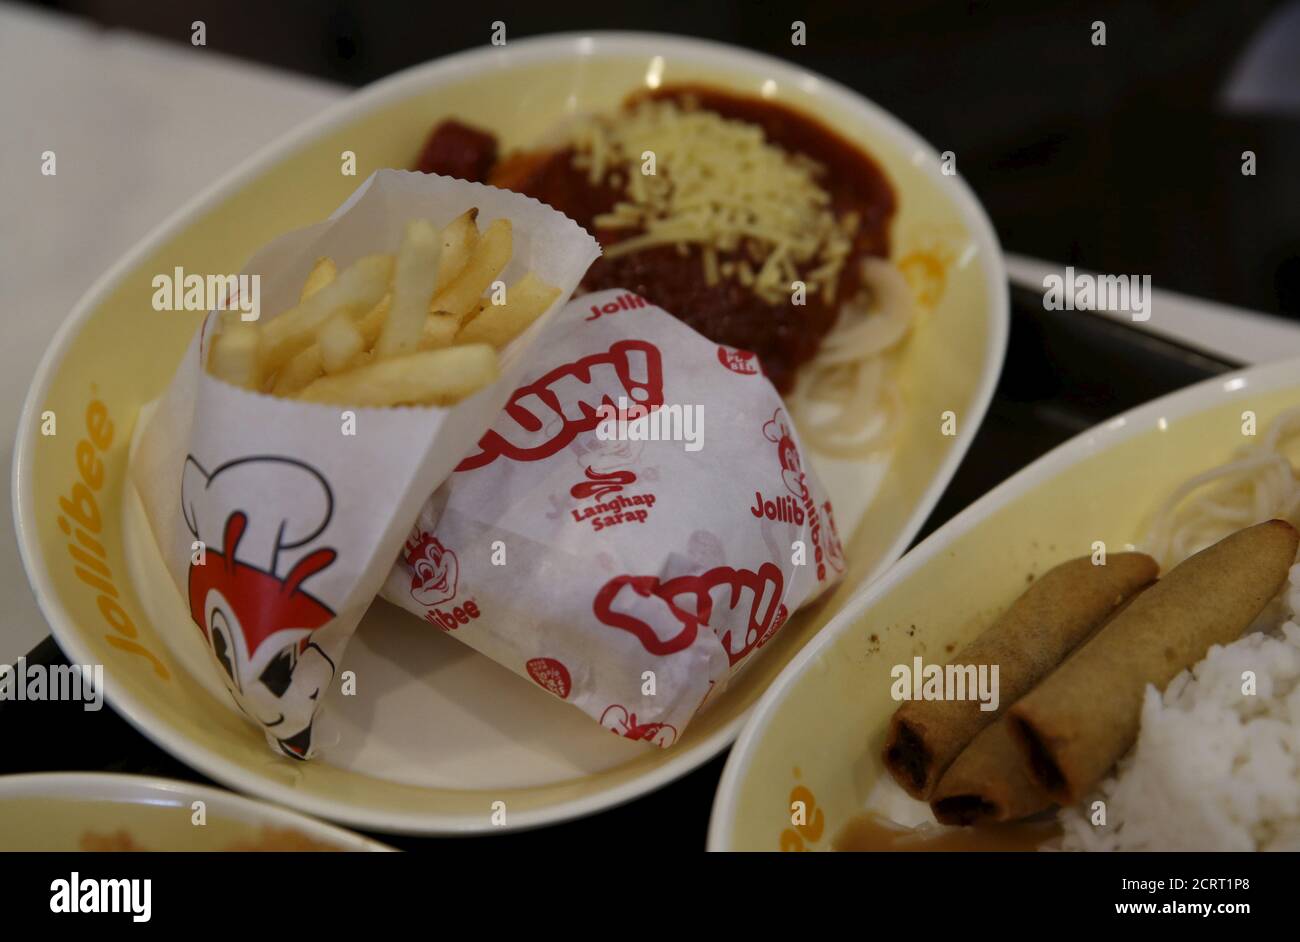 A plate combination of French Fries, Burger Yum and Jolly spaghetti, and a plate of Lumpia Shanghai with rice are pictured  inside a Jollibee franchise in BF Homes Paranaque, Metro Manila, March 3, 2016.   REUTERS/Erik De Castro Stock Photo